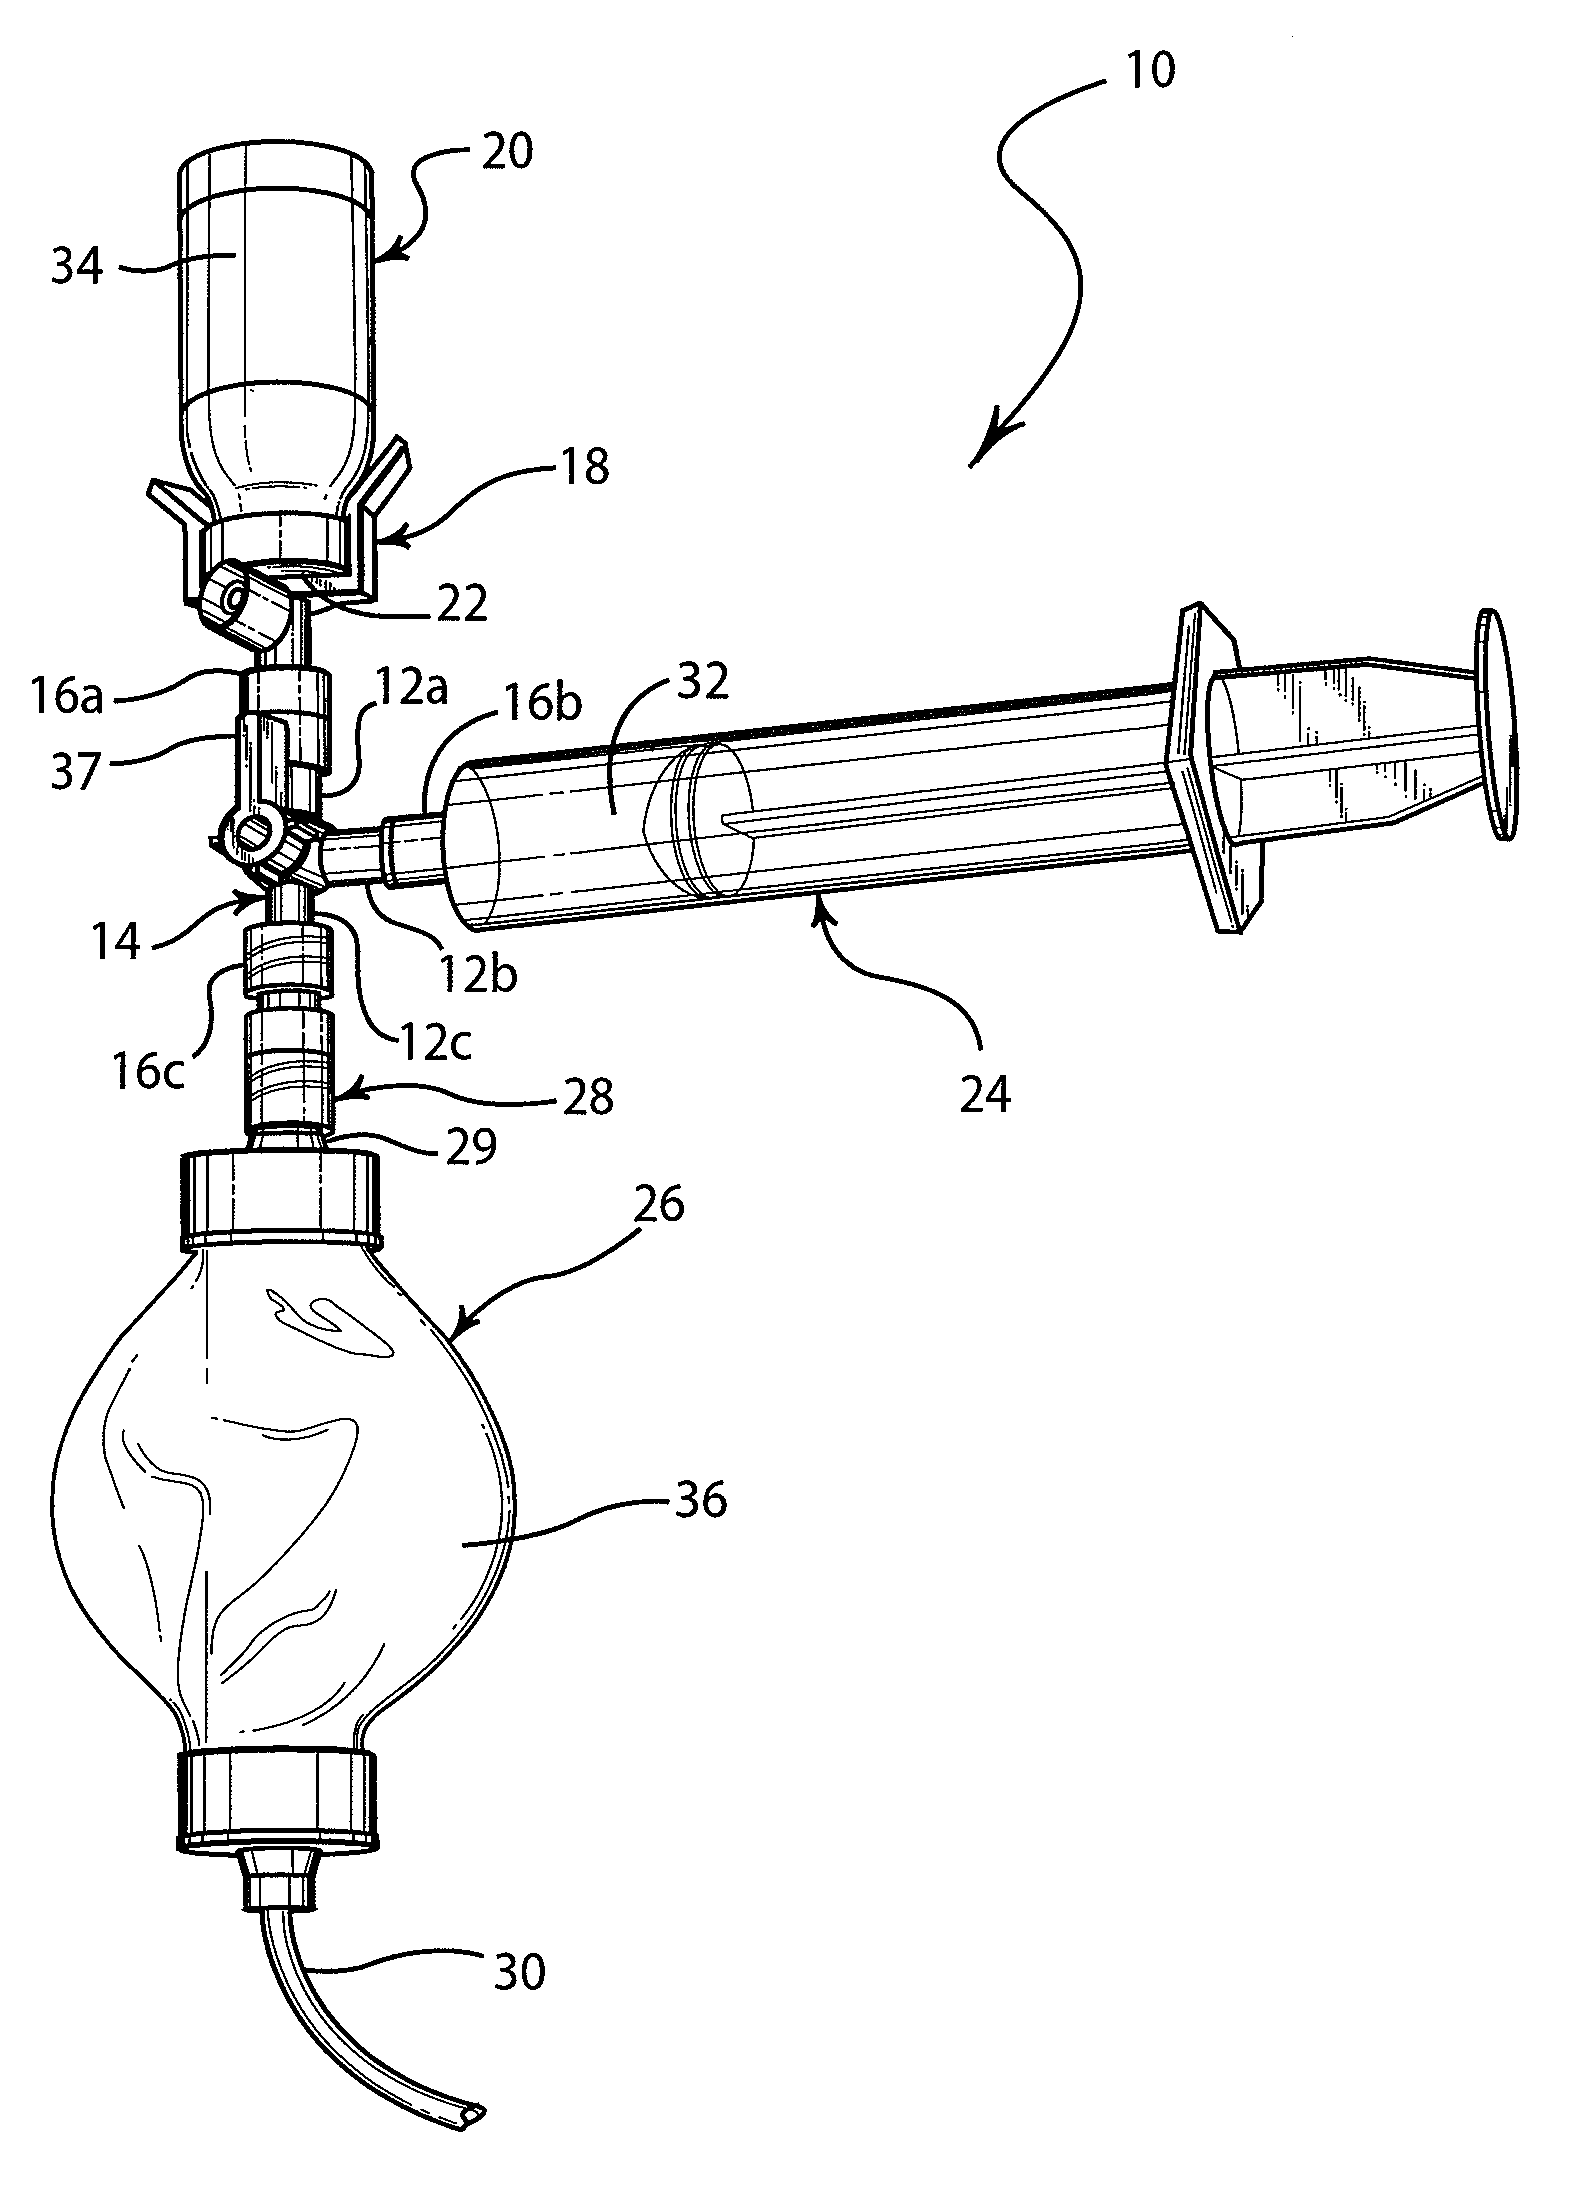 Apparatus and method for mixing and transferring medications